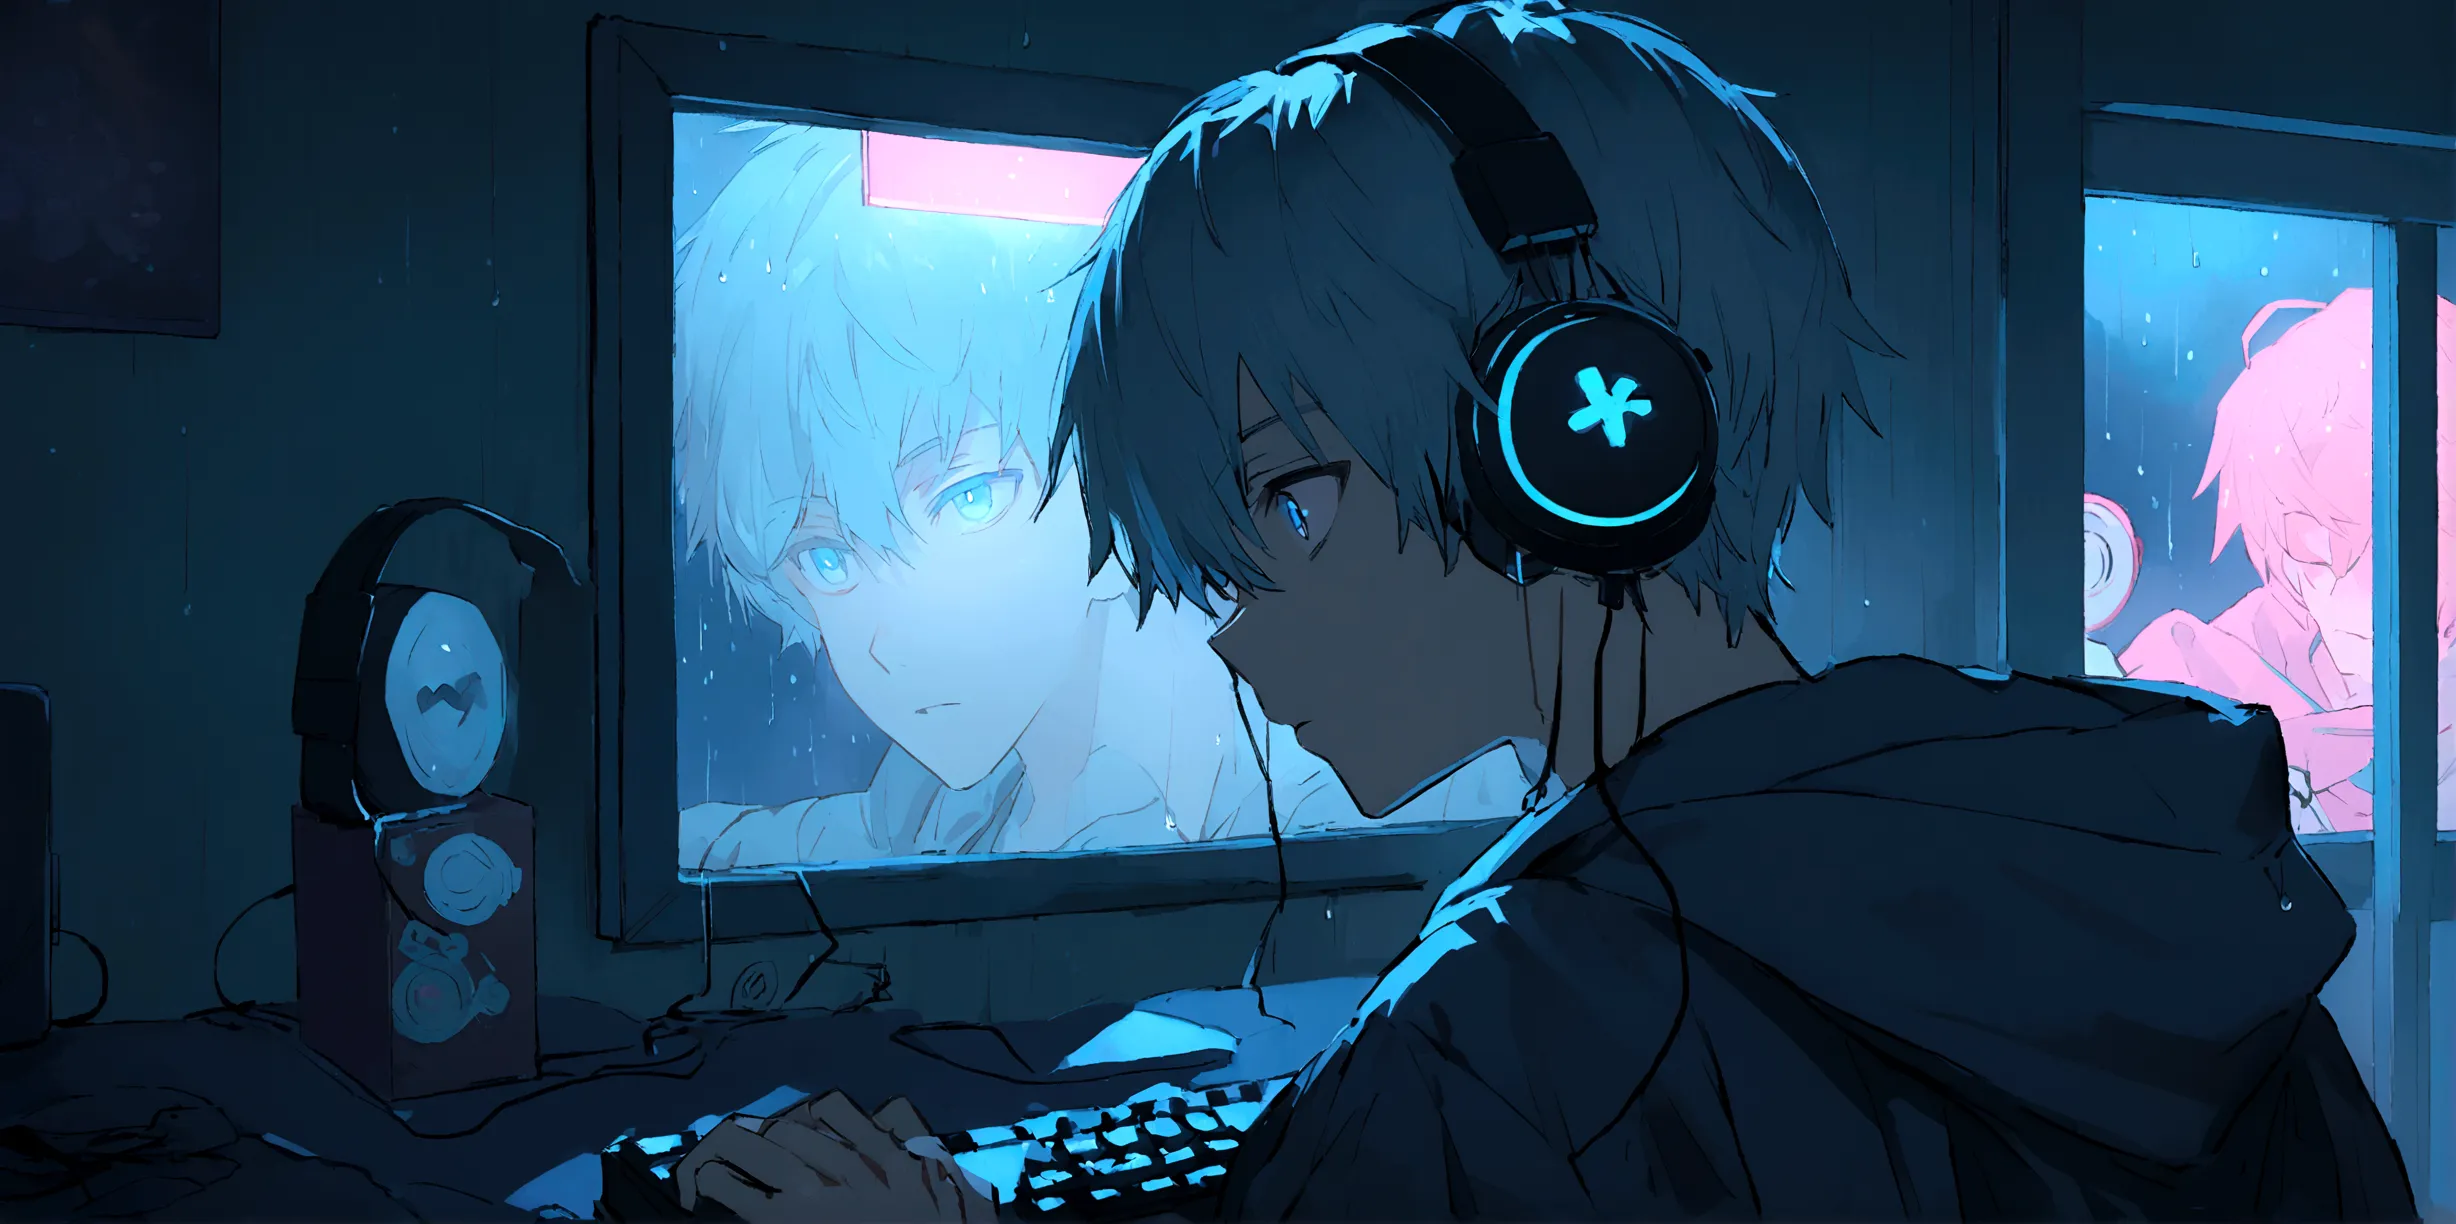 An 16 years old gamer anime boy, looking at computer, so many neon lights, night, rain outside, cozy room, closed window, boy an...